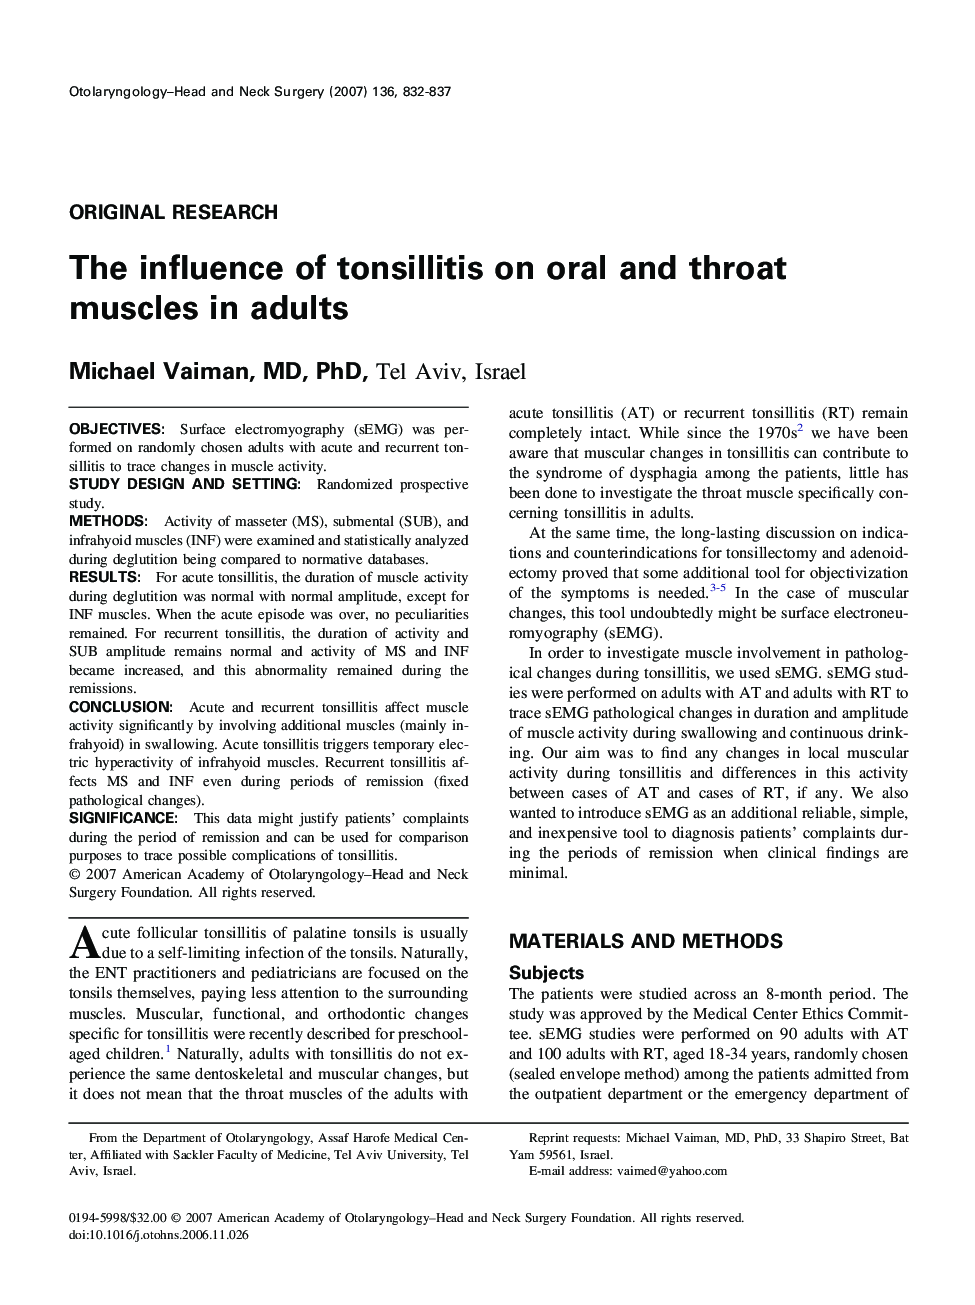 The influence of tonsillitis on oral and throat muscles in adults